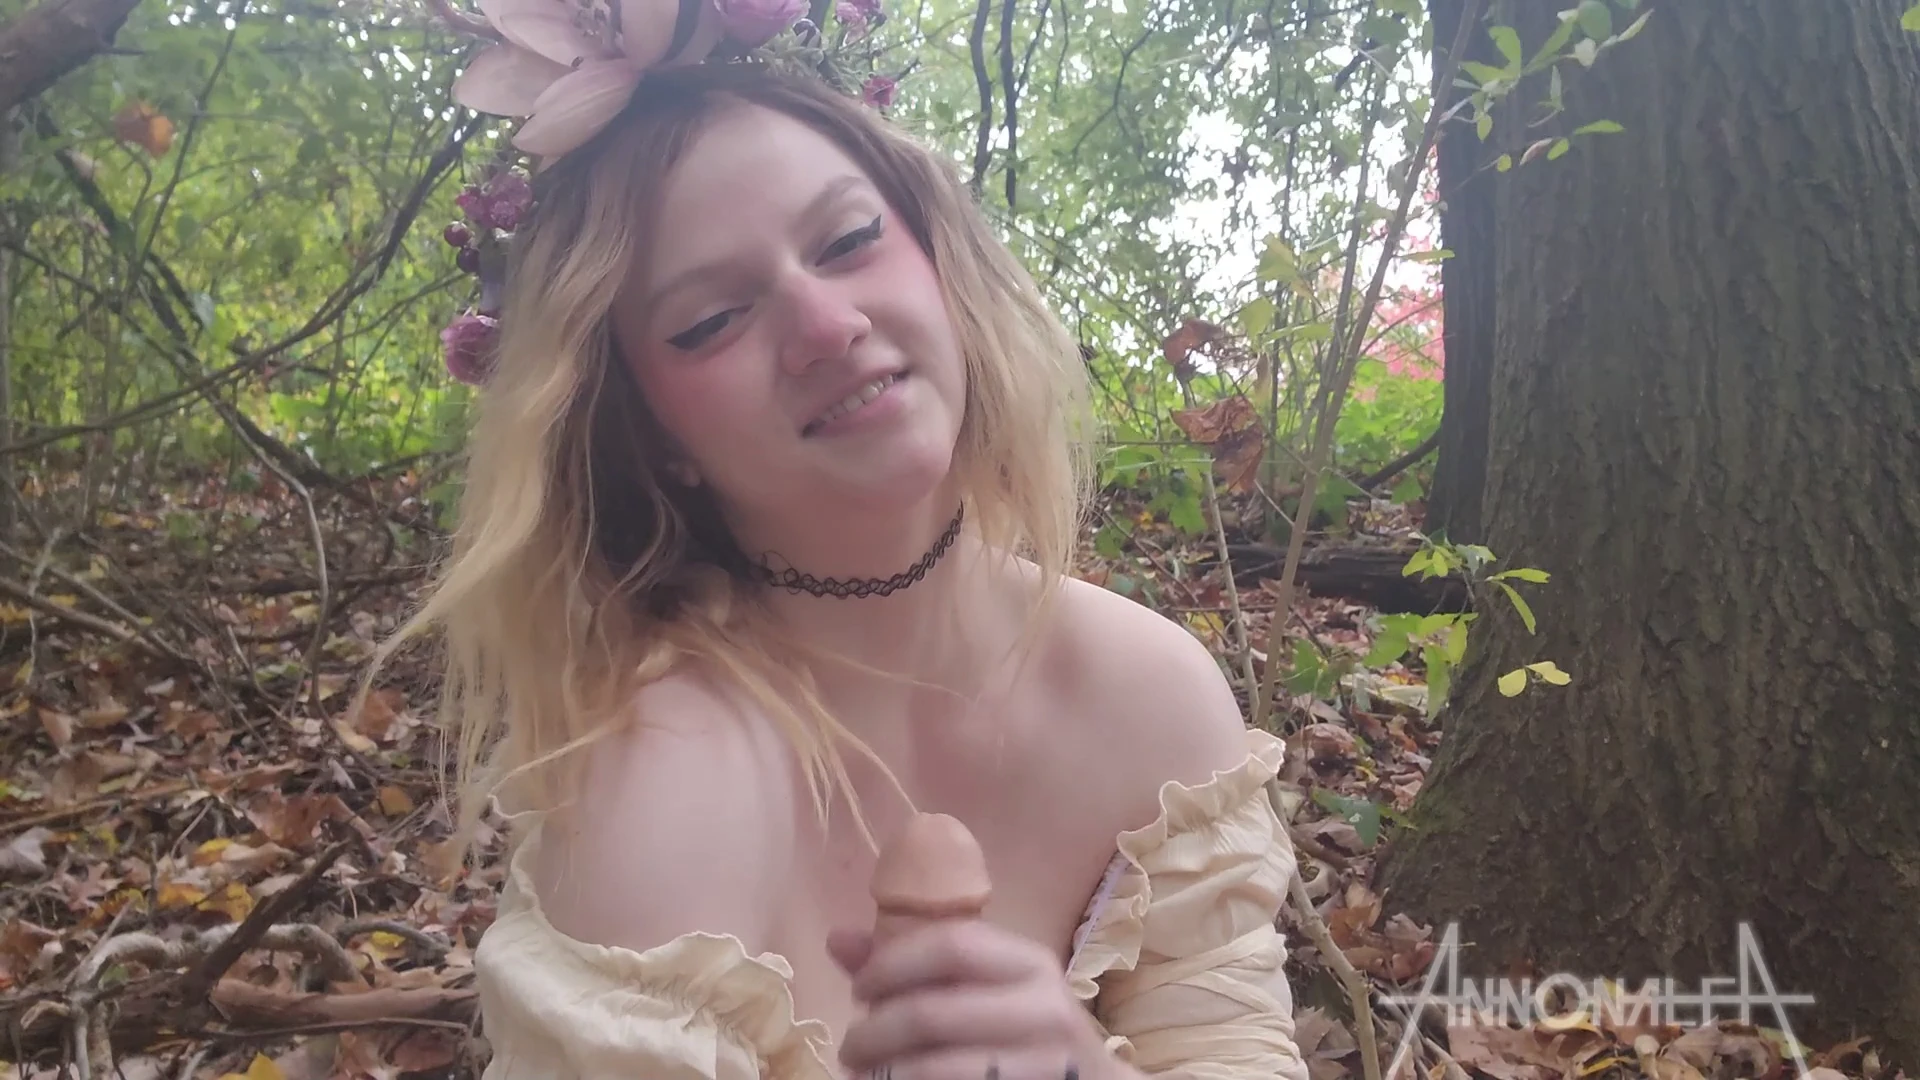 Handjob in the Woods (link in comments!)